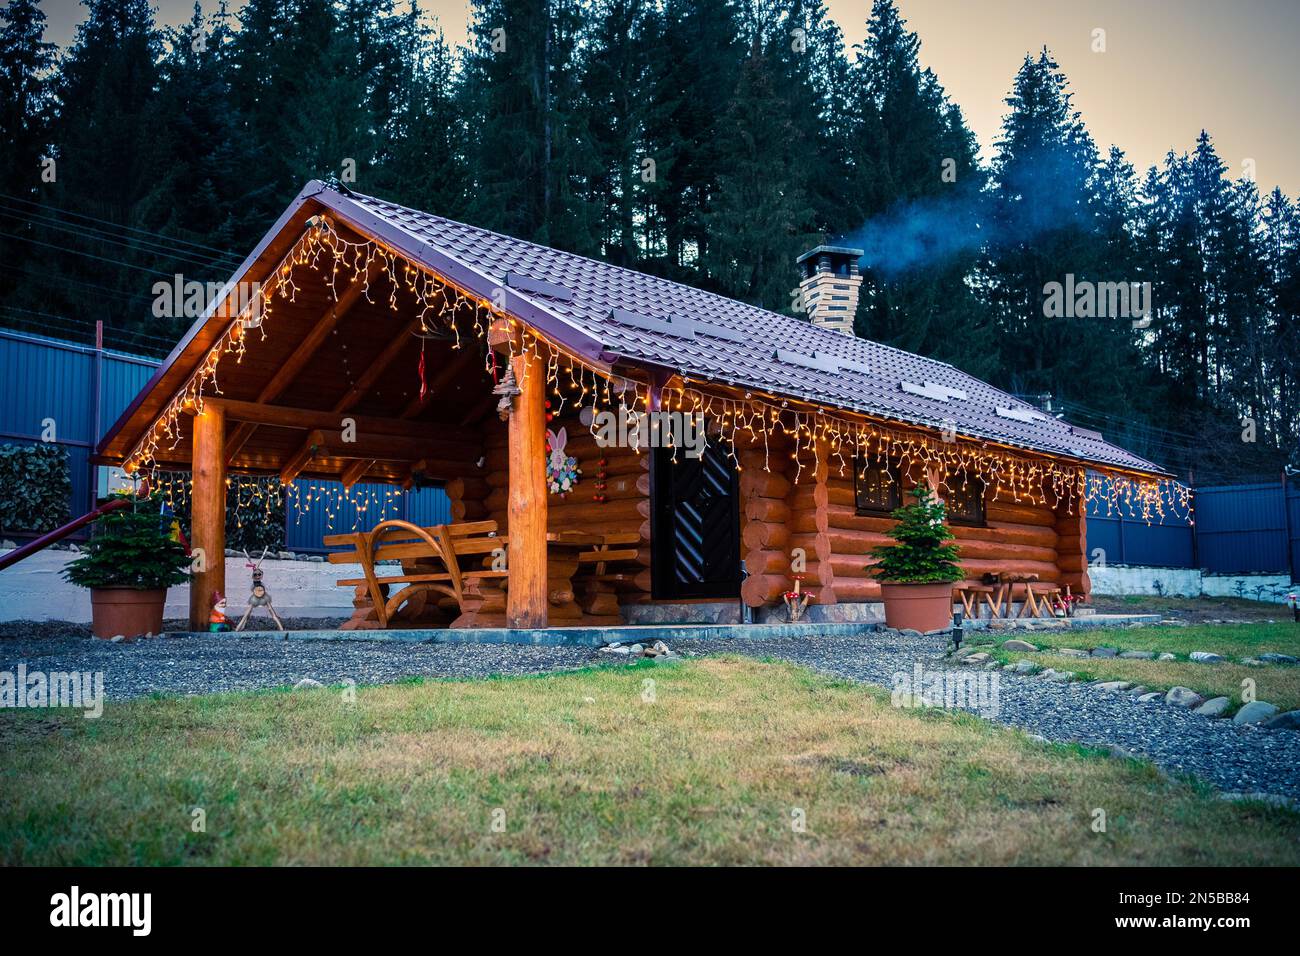 Wooden Cabin from Bucovina region of Romania. European spruce forest background and fireplace burning inside Stock Photo